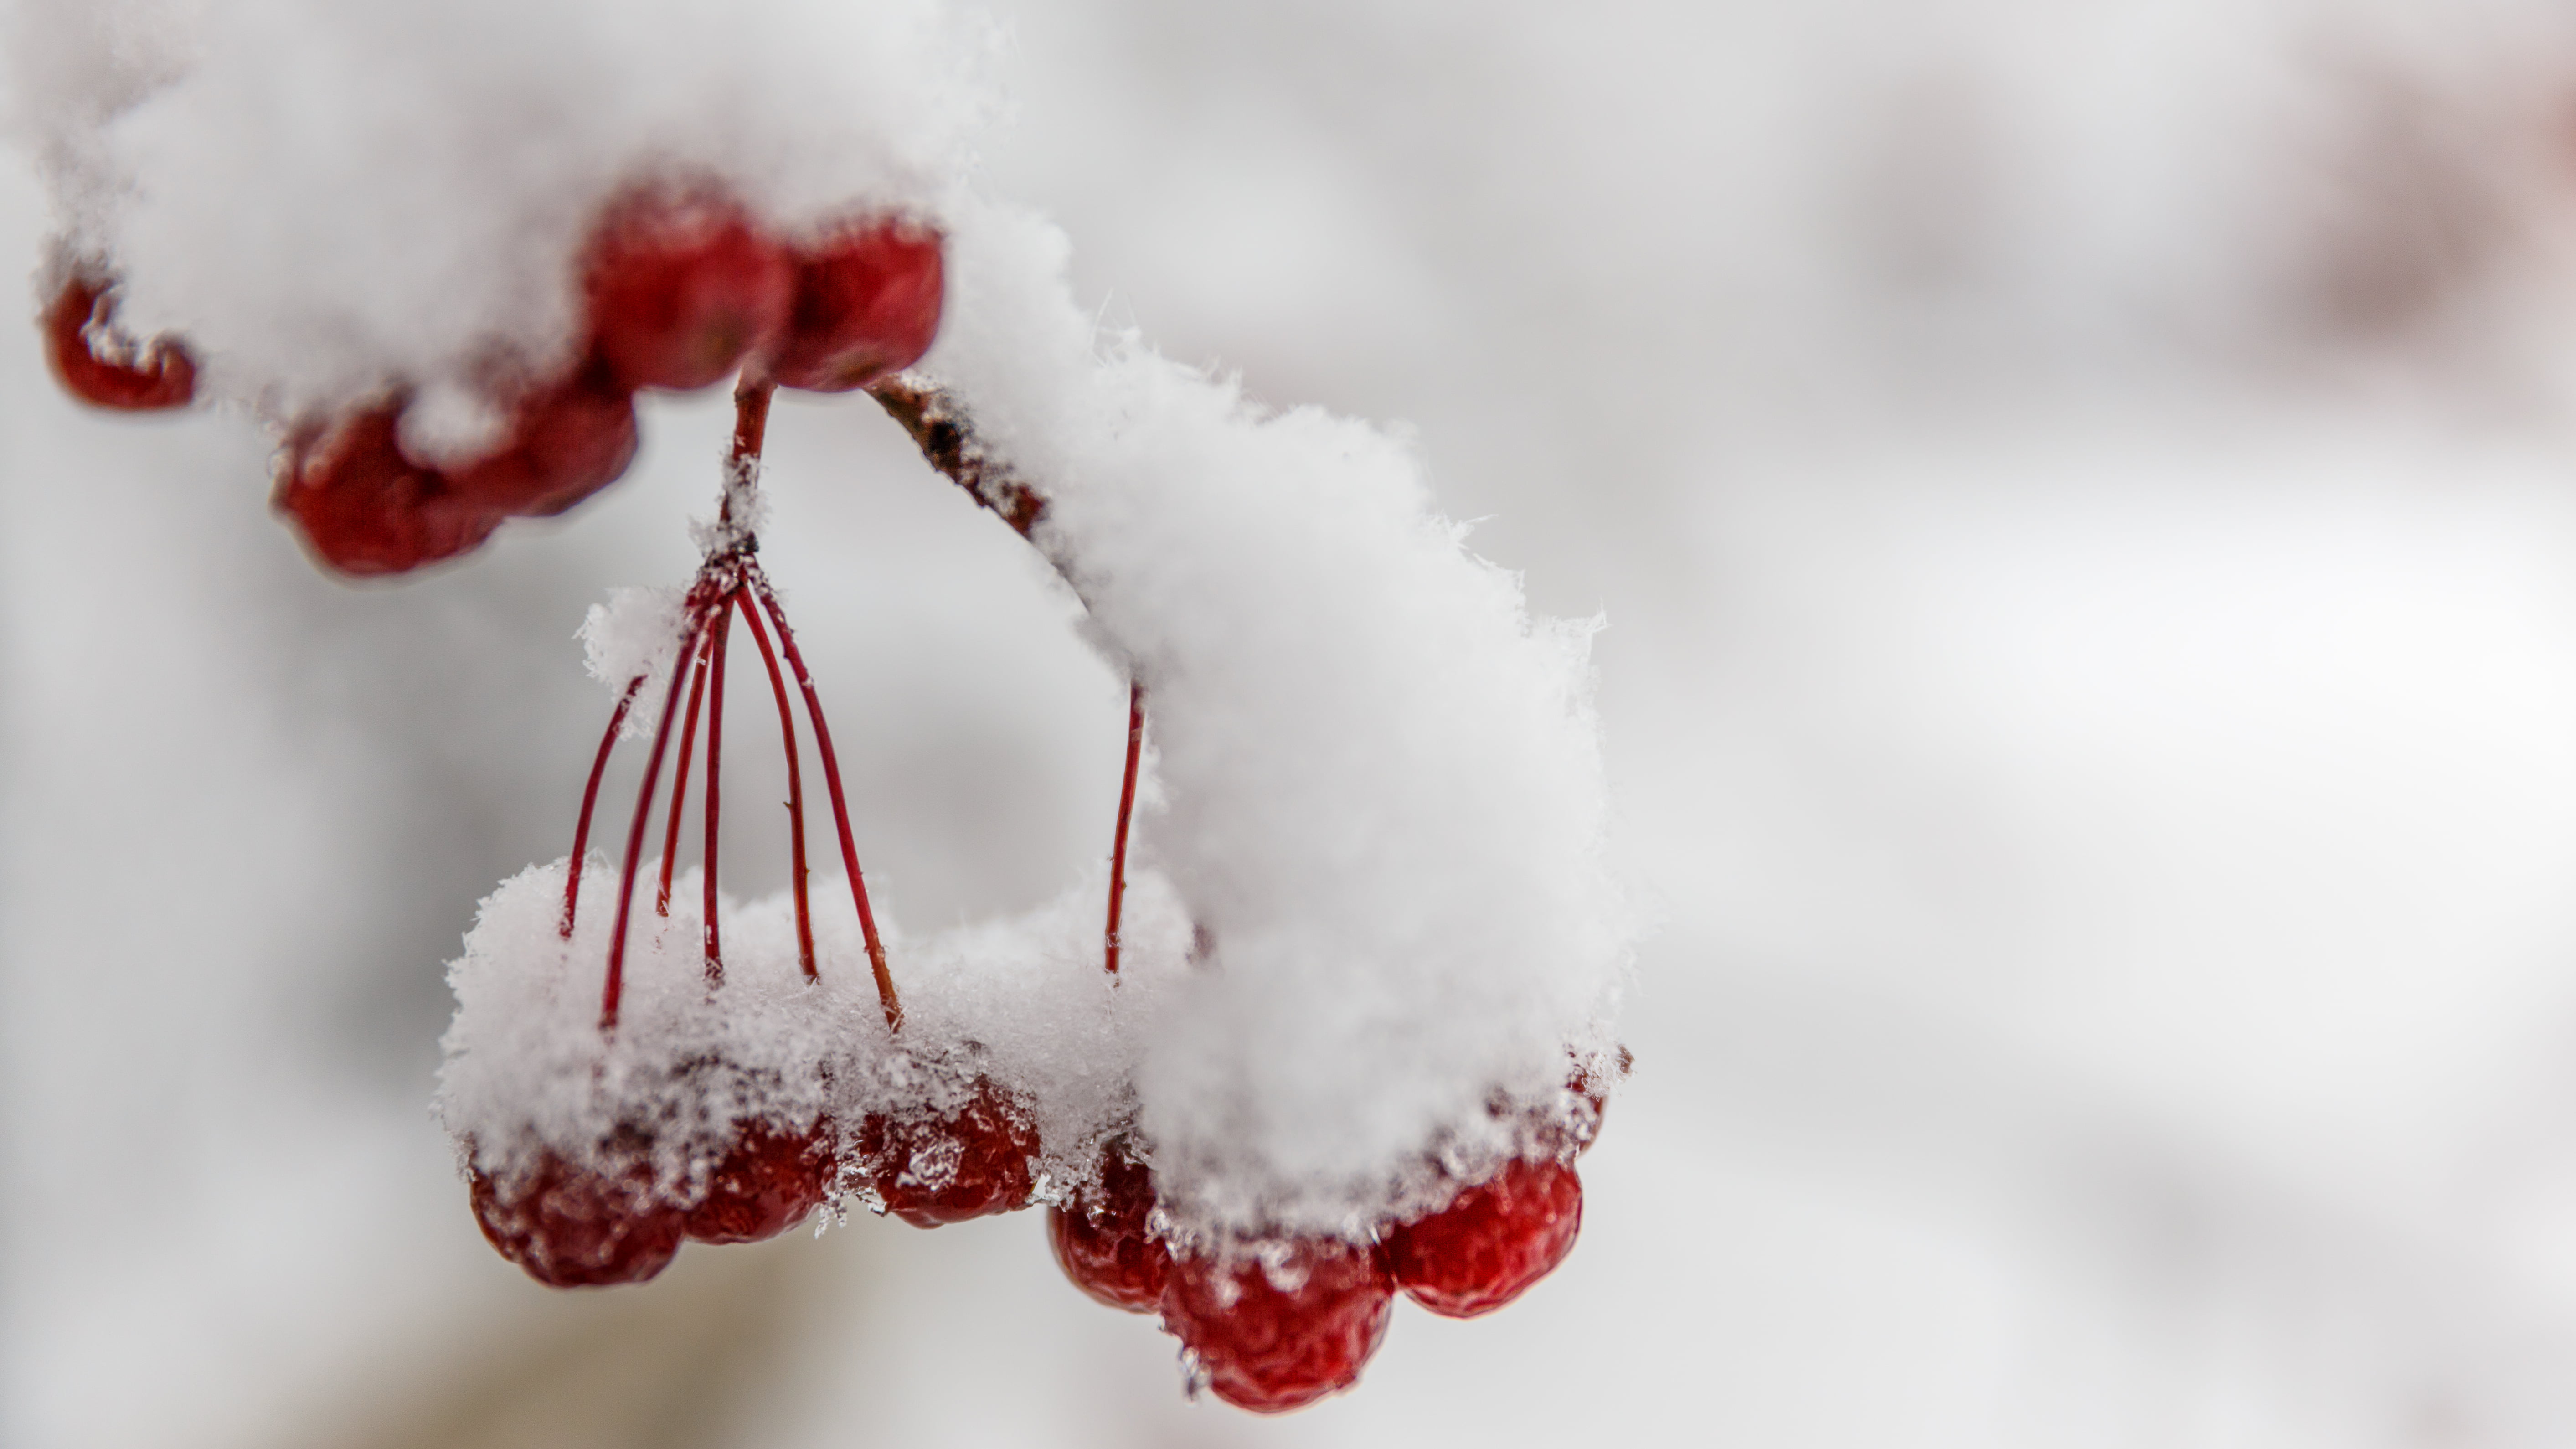 closeup photo of red cherries cover by snow during daytime